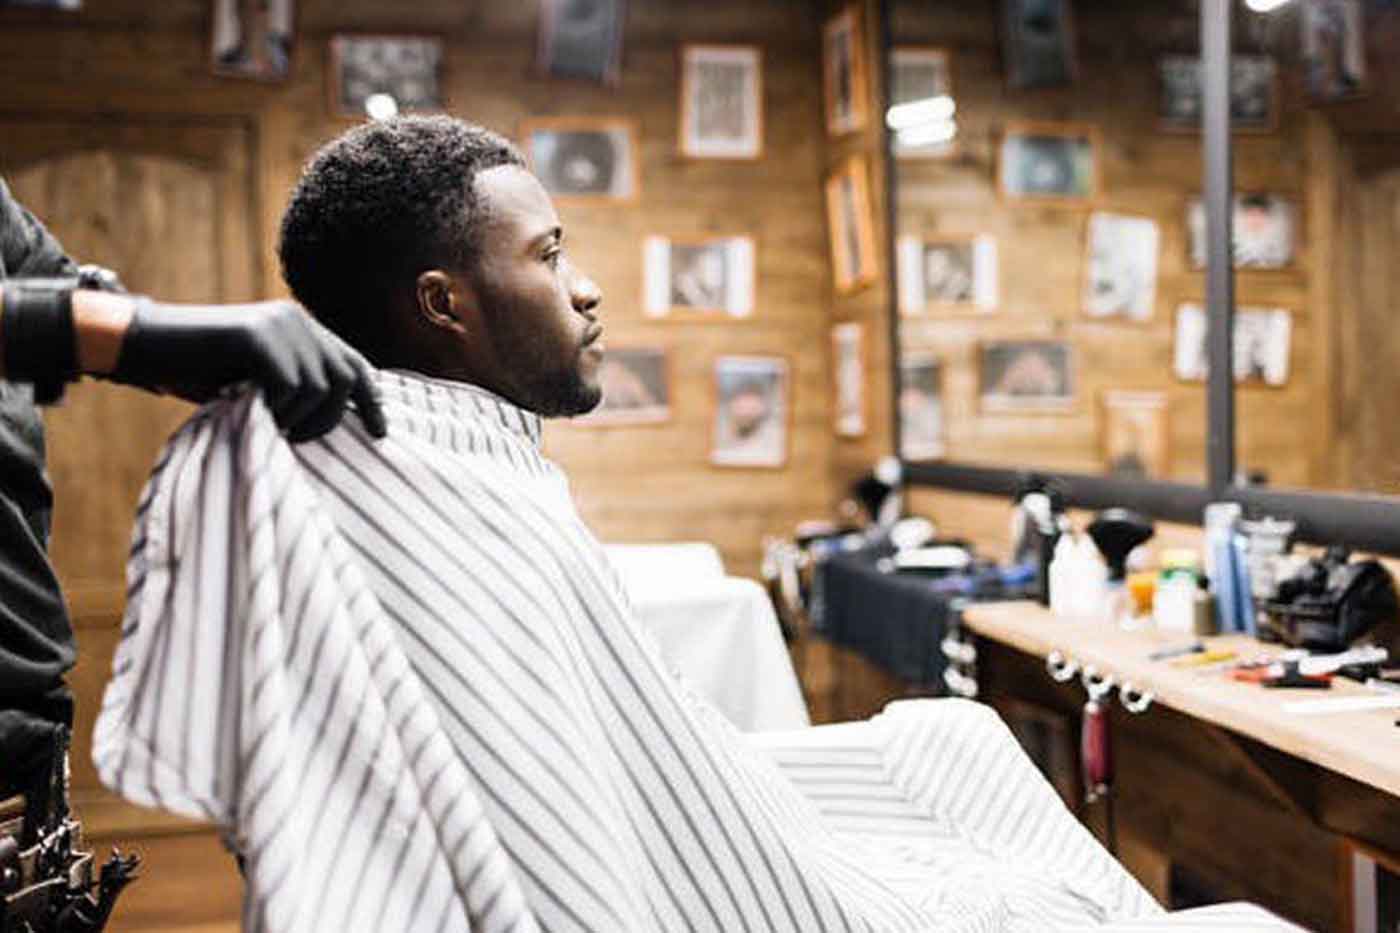 Qatar illustrates customer rights for barber shops and salons